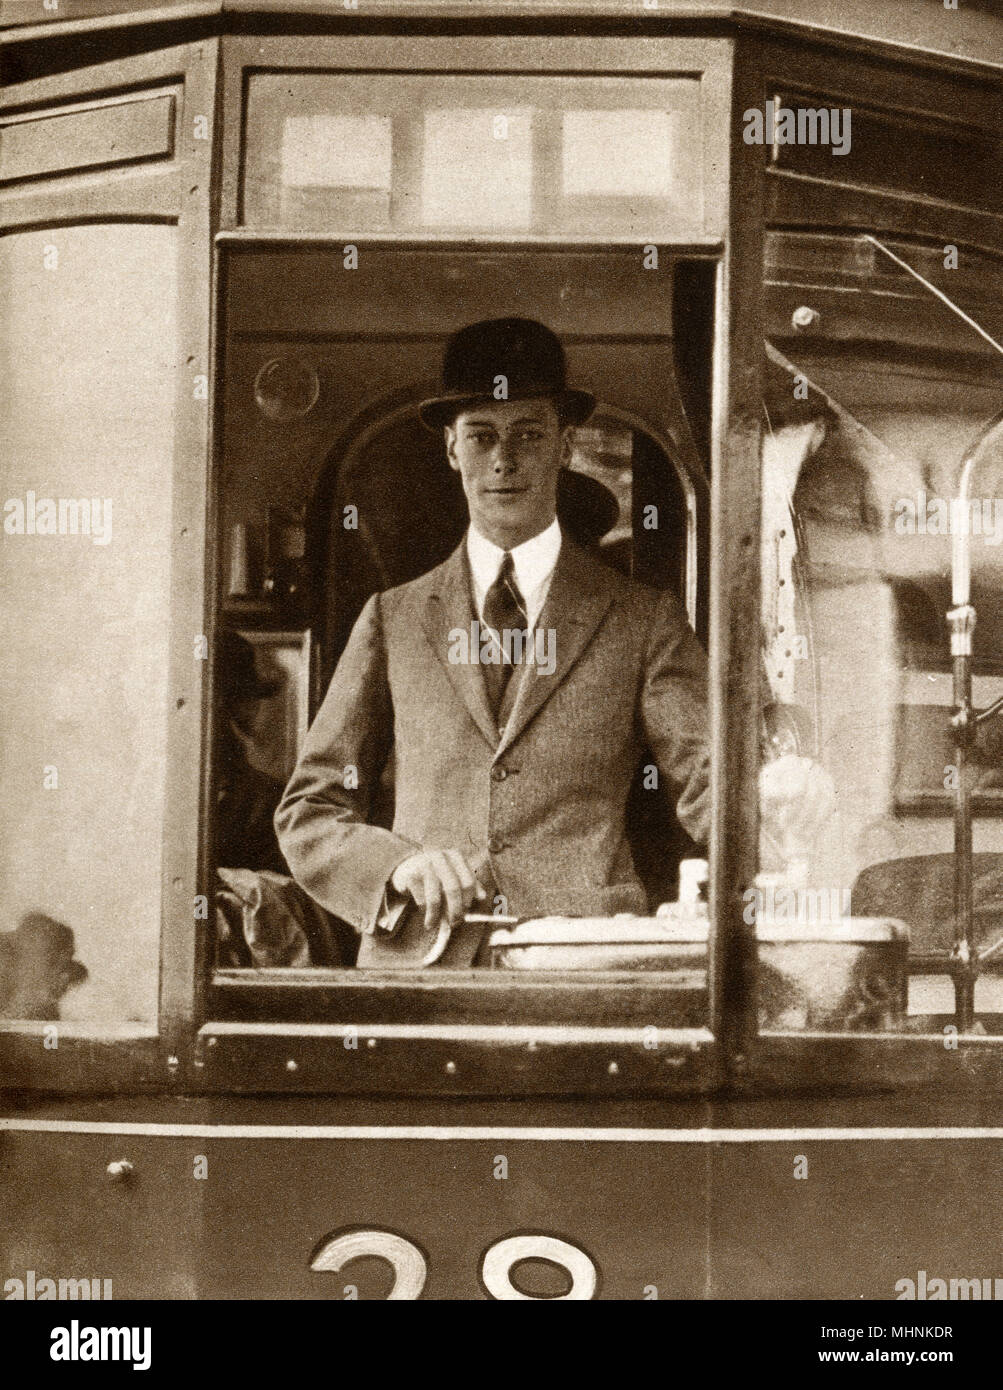 Albert, Duke of York - at the controls of a Glasgow Tram Stock Photo